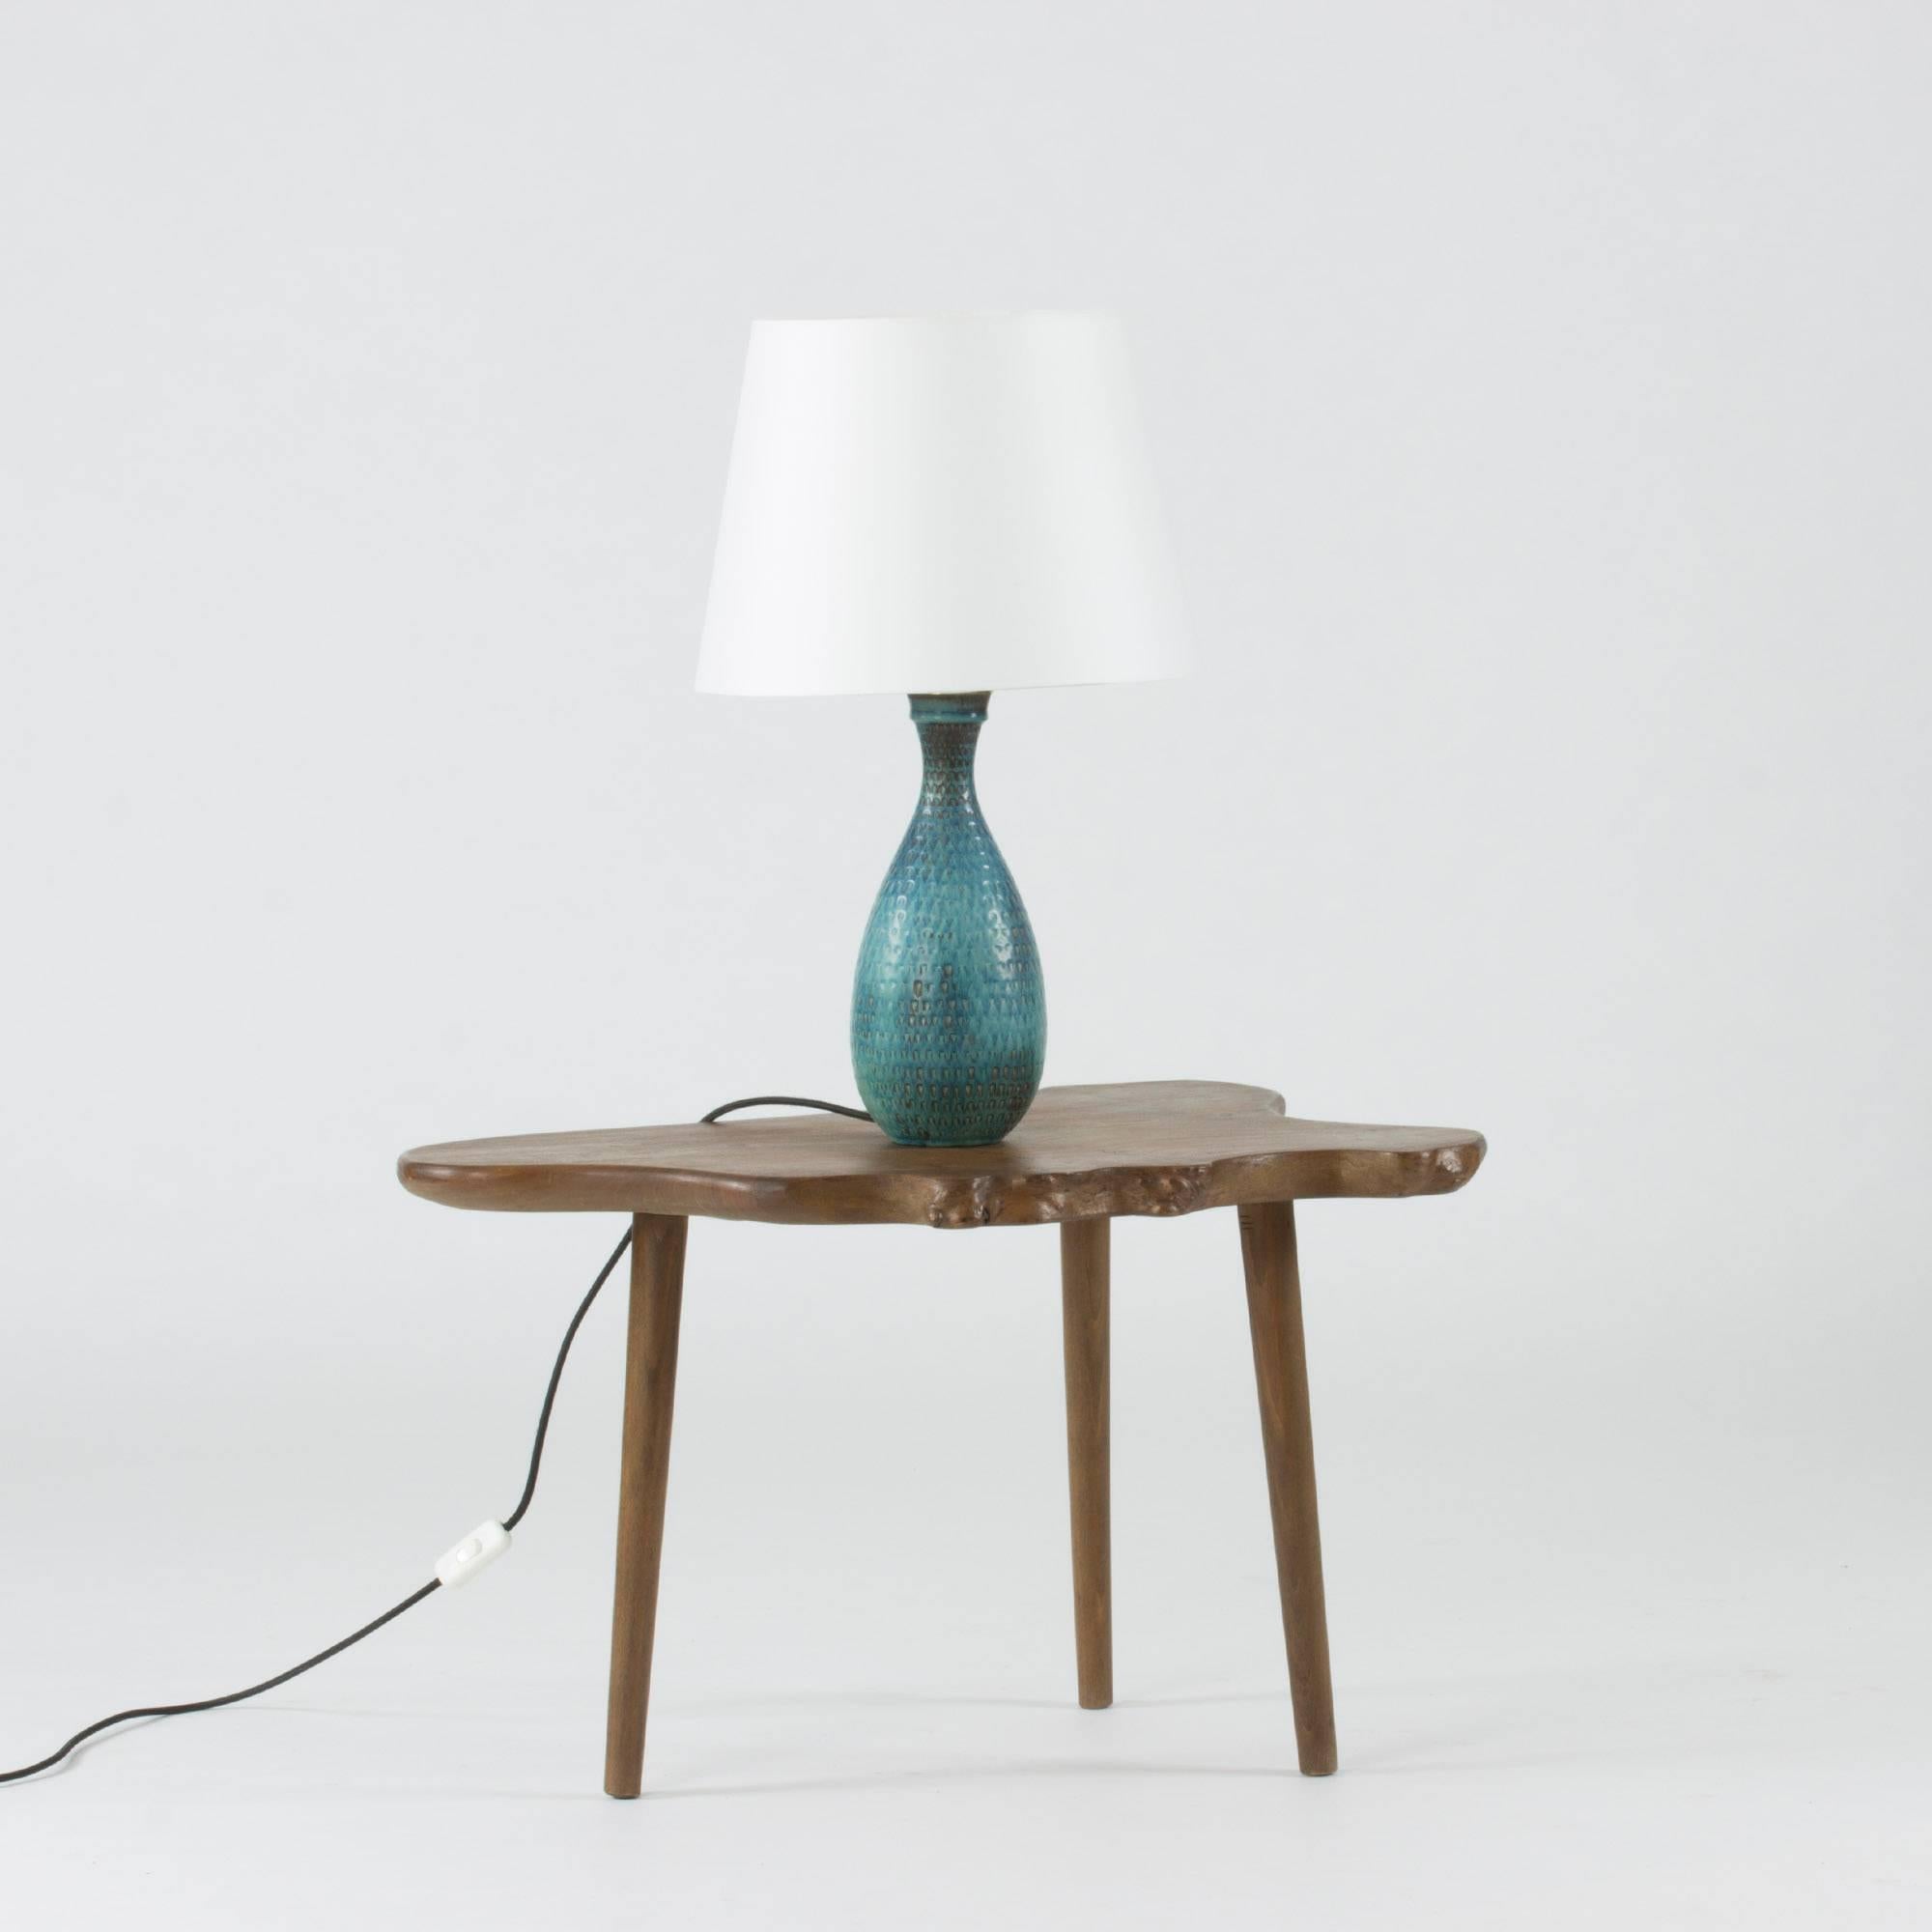 Lovely stoneware table lamp by Stig Lindberg, with the body decorated in a characteristic Lindberg graphic relief pattern and glazed in greenish blue hues. New wiring with a textile clad cord.